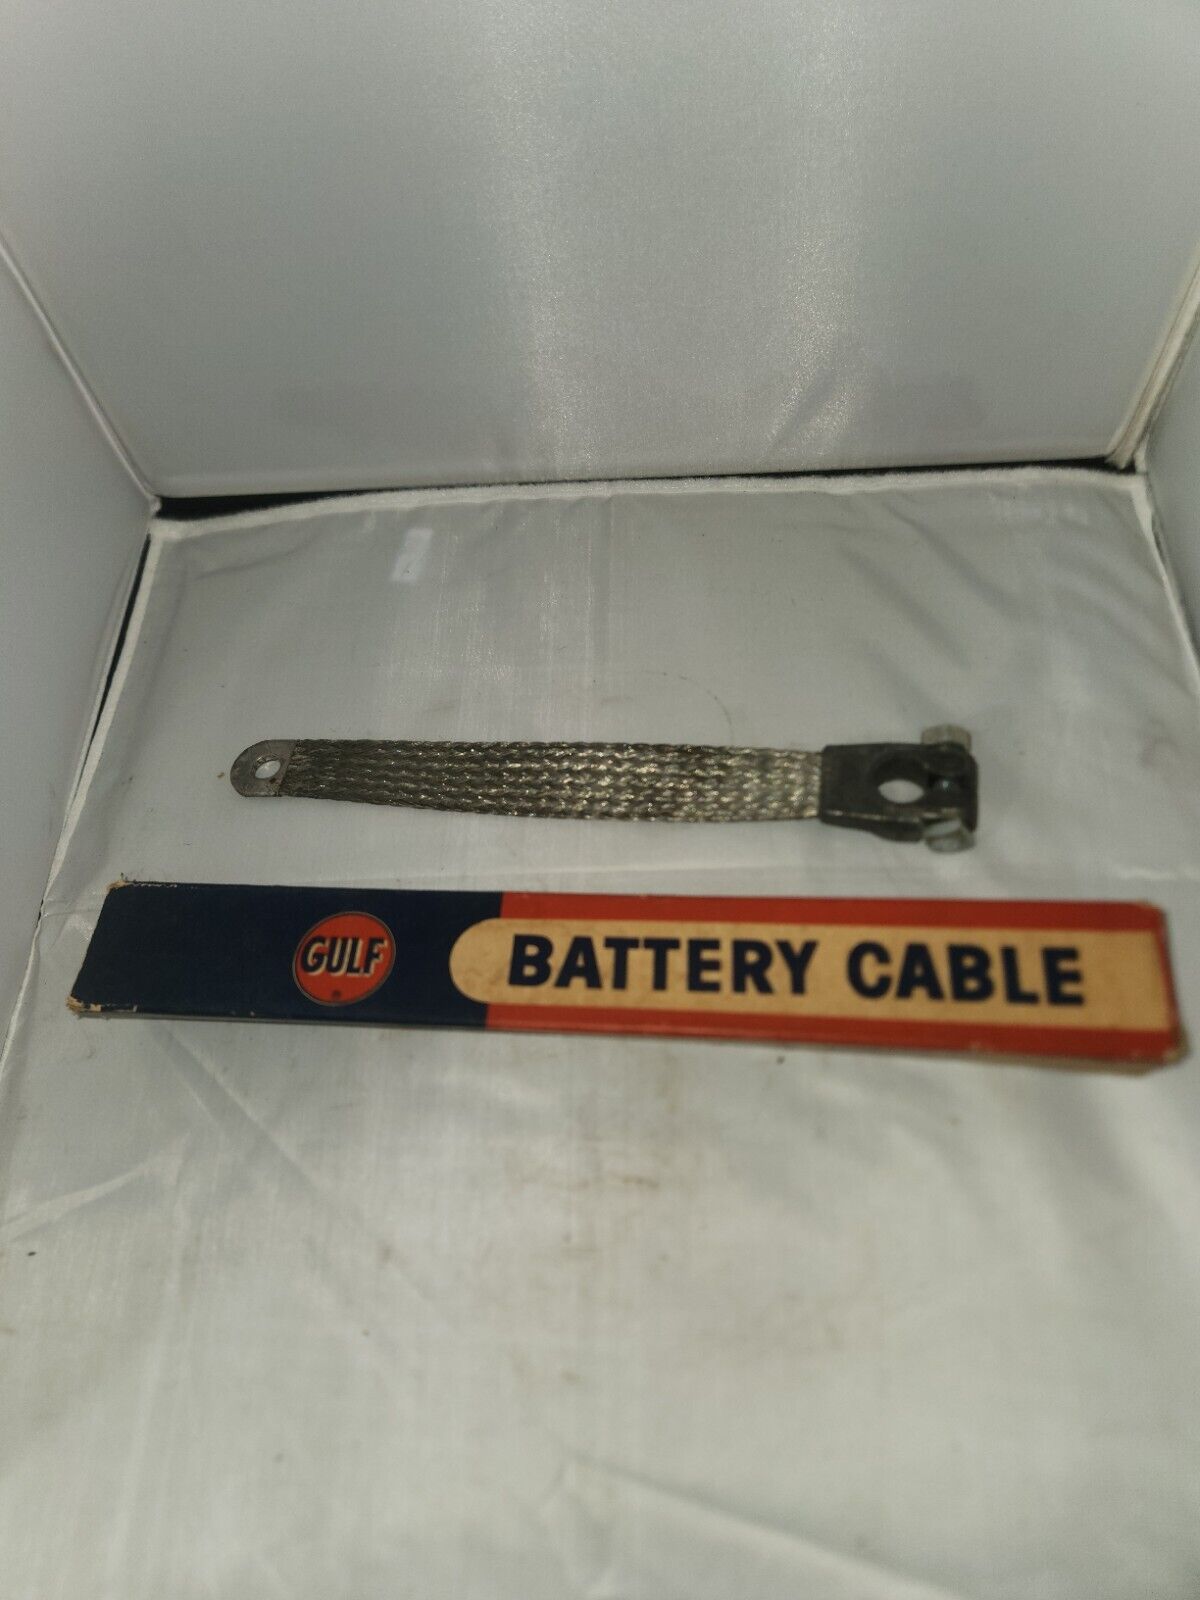 Vgt. Gulf Ground Battery Cable In Box